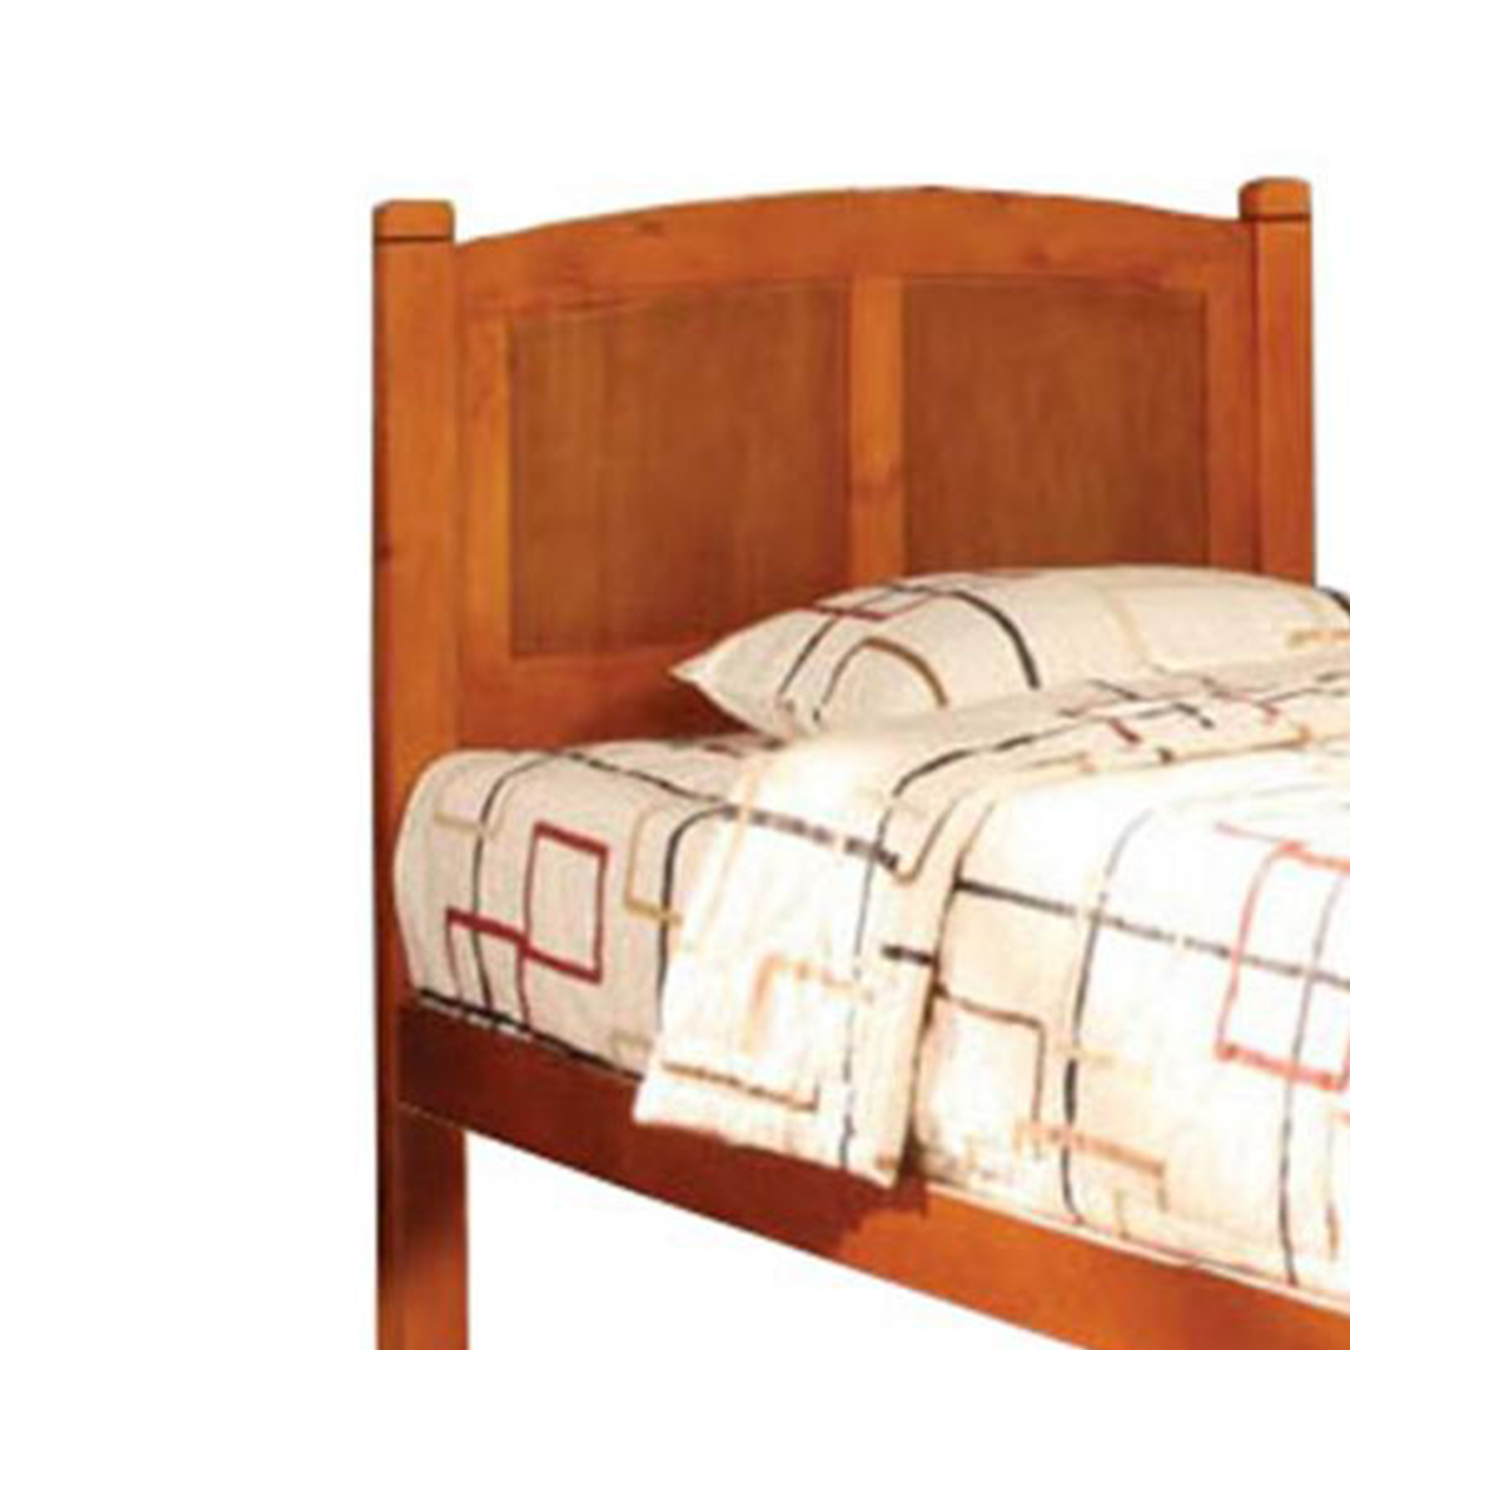 Benjara Wooden Twin Bed with Panelled Headboard and Footboard, Brown - image 5 of 6